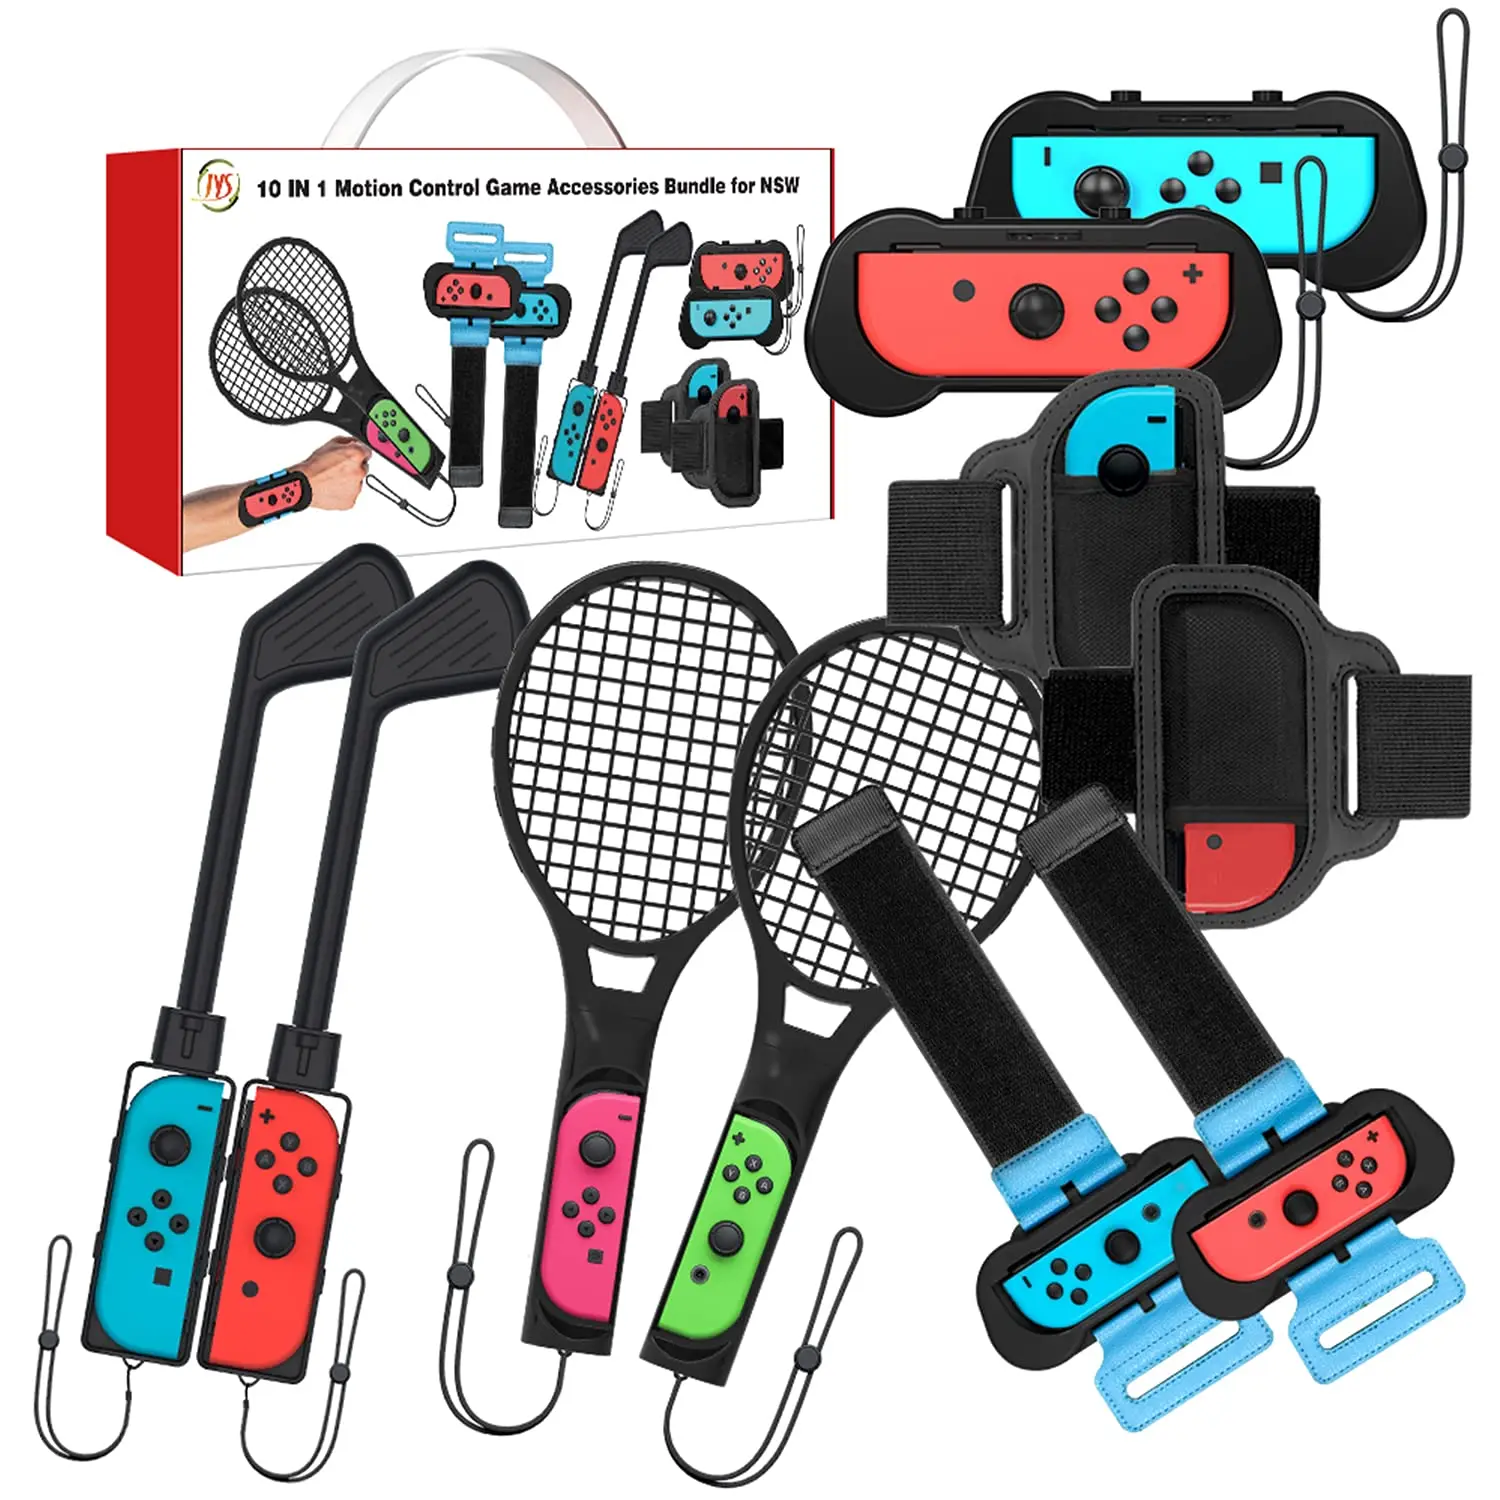 2022 Switch Sports 10 Switch Grip Accessories OLED & Bands 1 Case Nintendo Golf Strap Kit Dance Grip Joycon for & in Wrist Leg